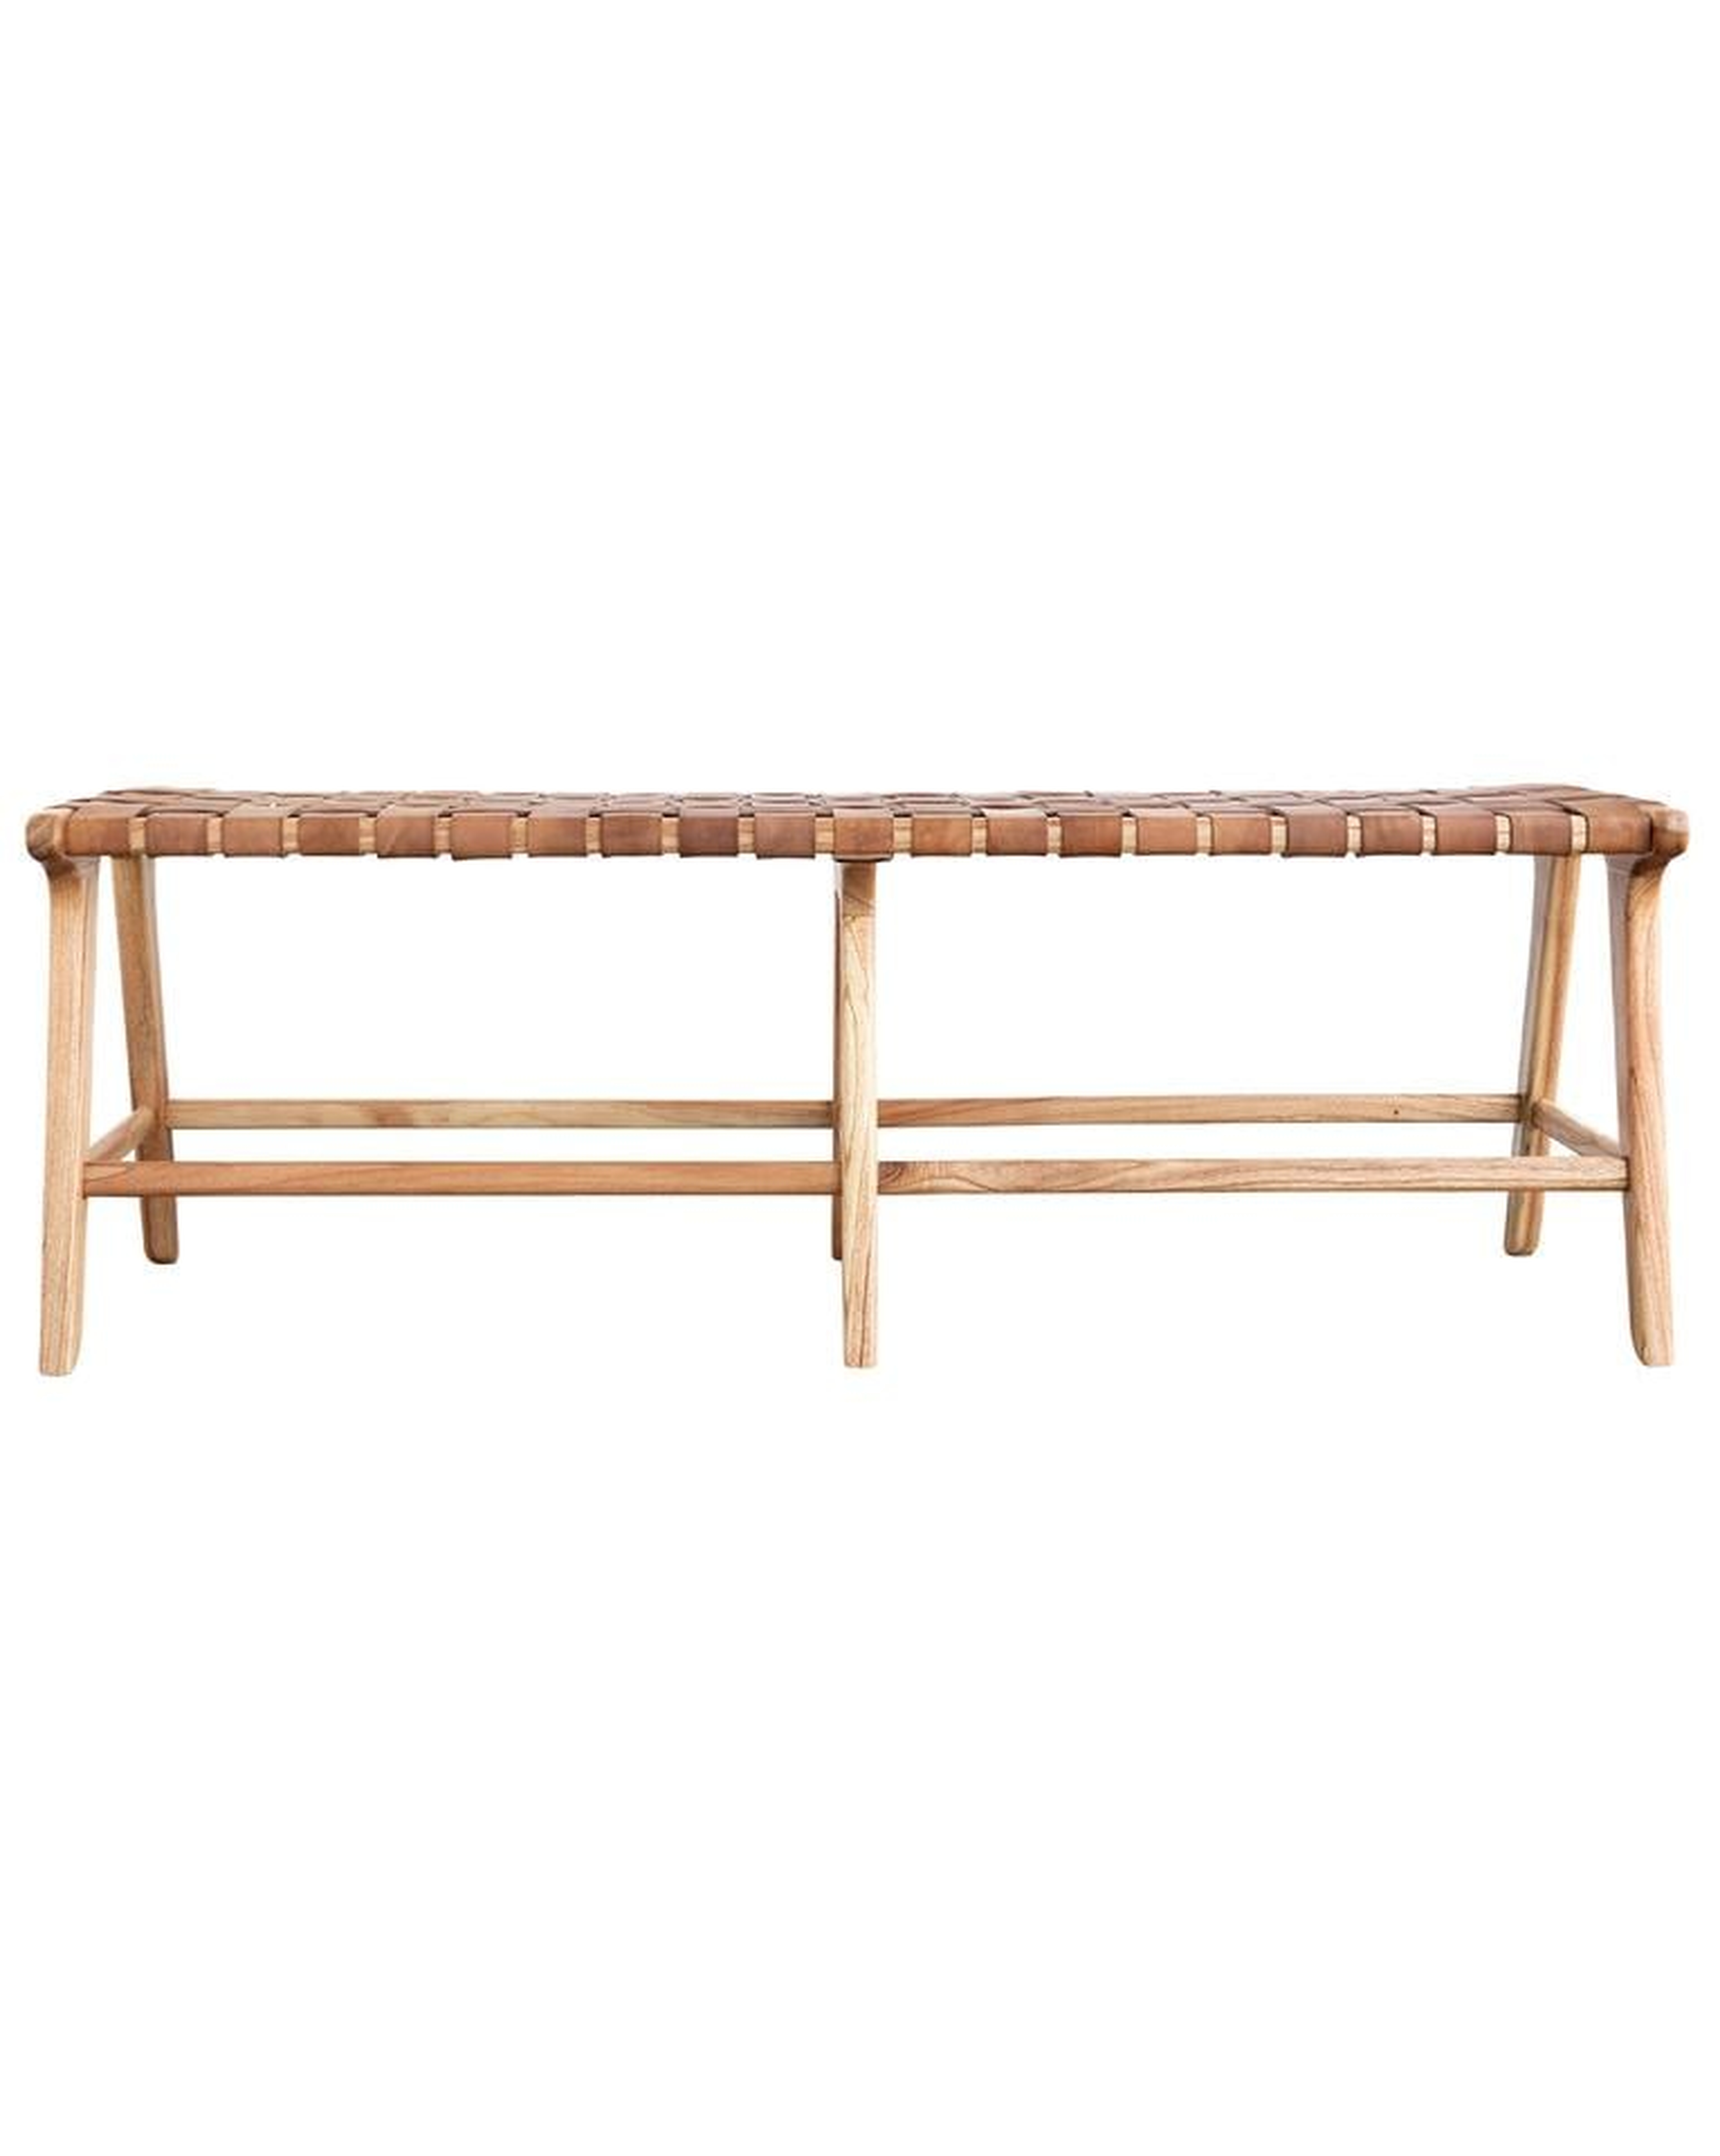 Alfie Woven Leather Bench - McGee & Co.